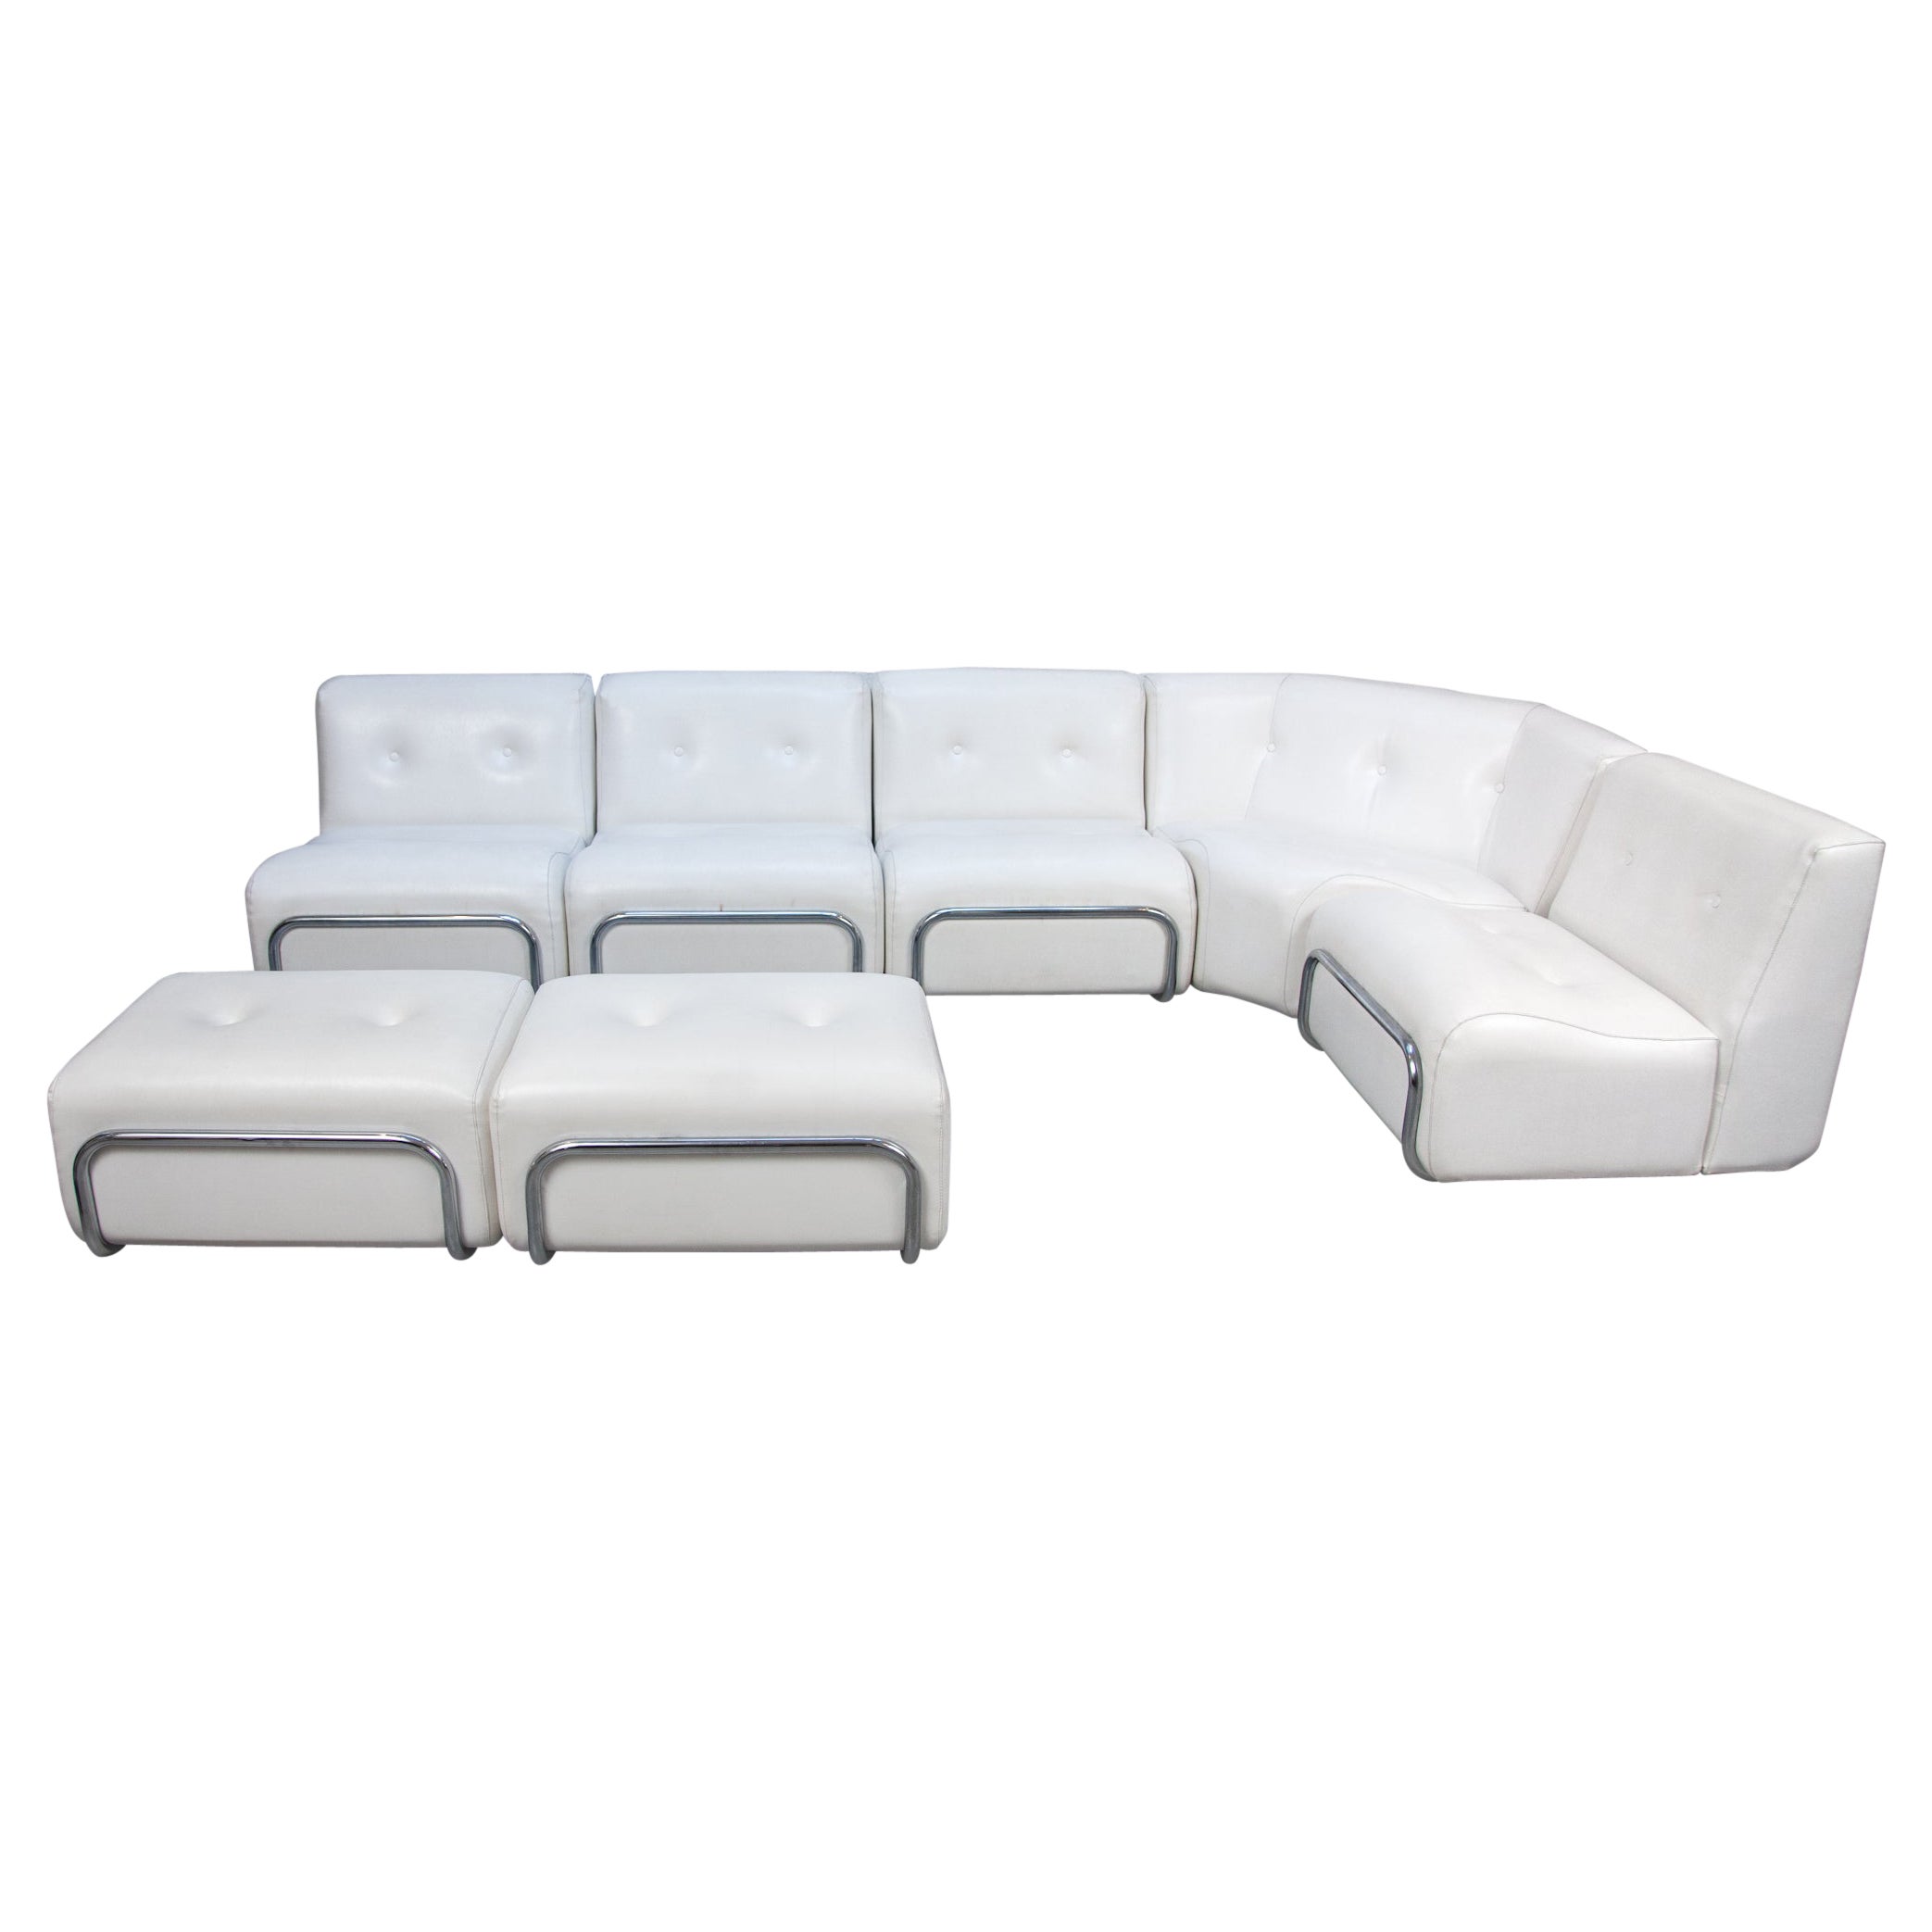 Modular Eight Chairs Living-roomset of Adriano Piazzesi Lounge Chairs and Stools For Sale